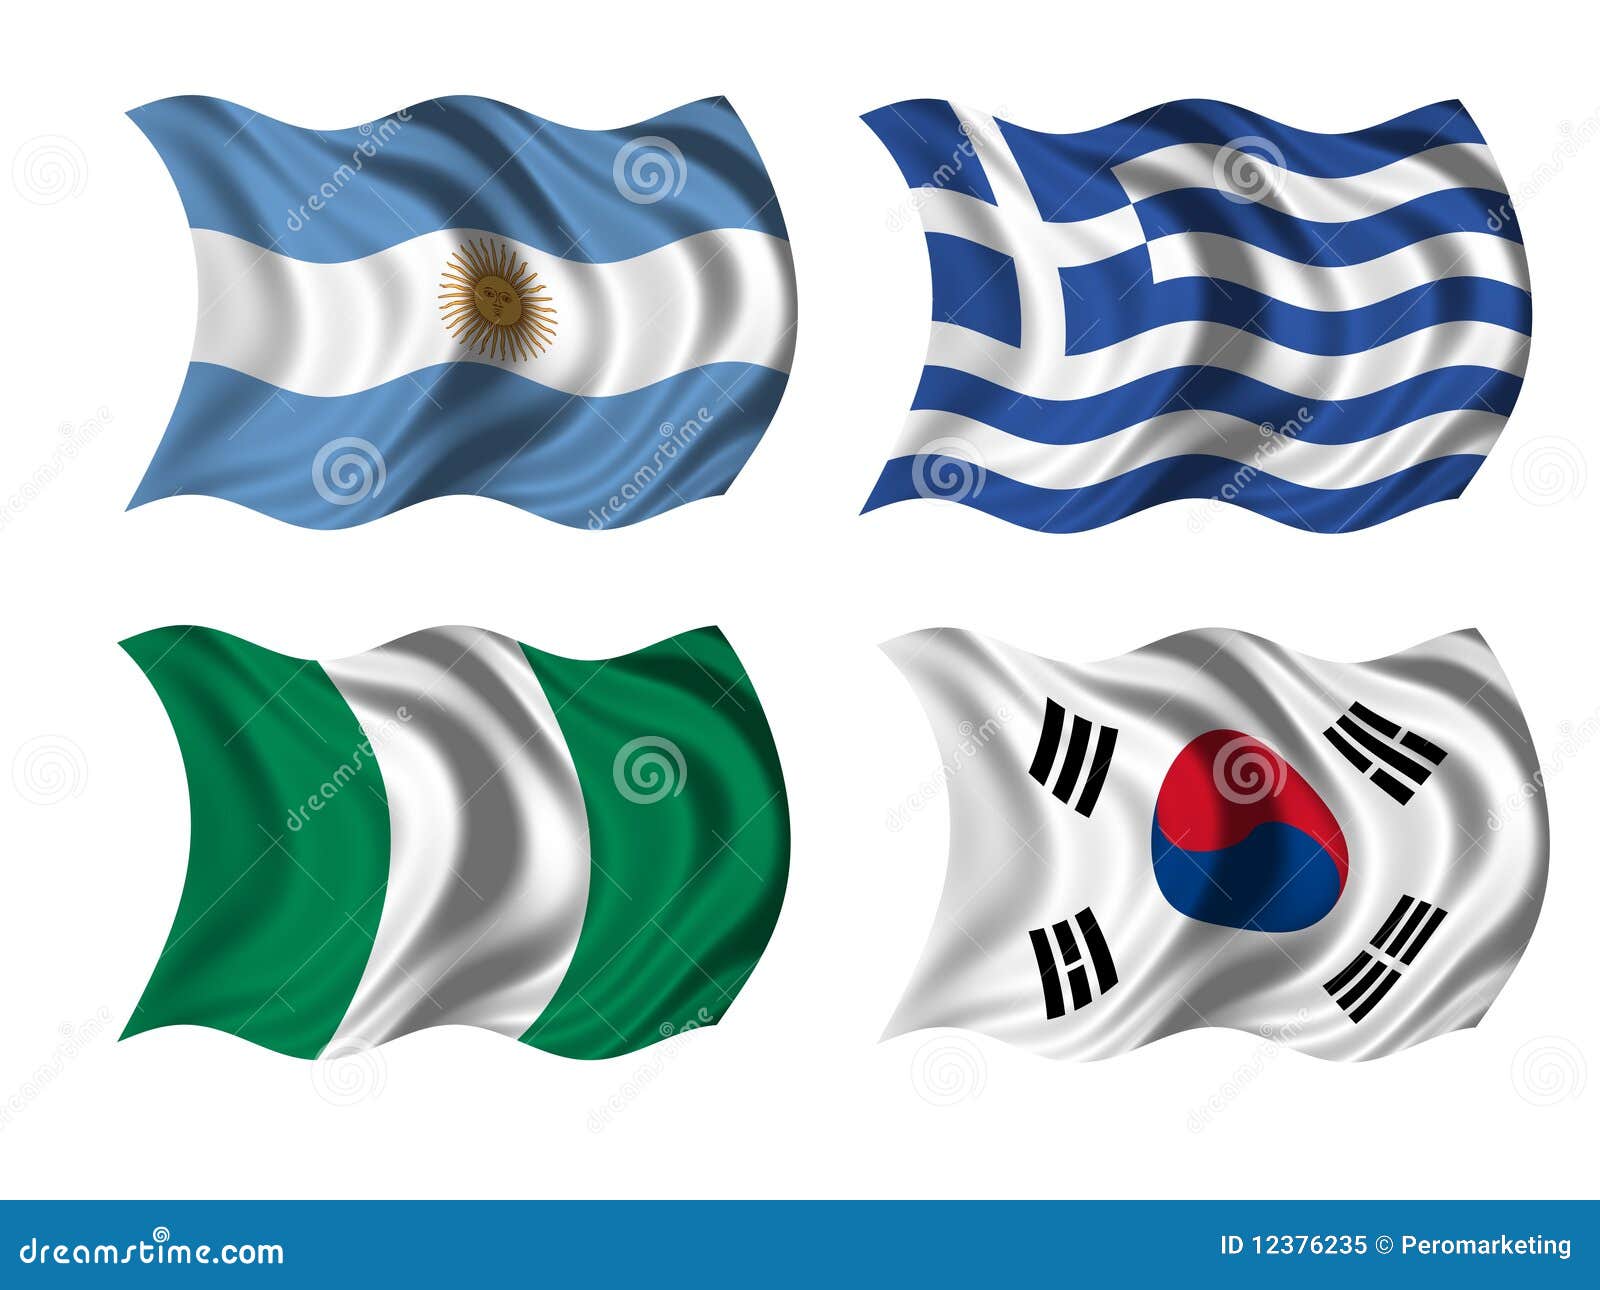 Soccer team flags group B stock illustration. Illustration of country